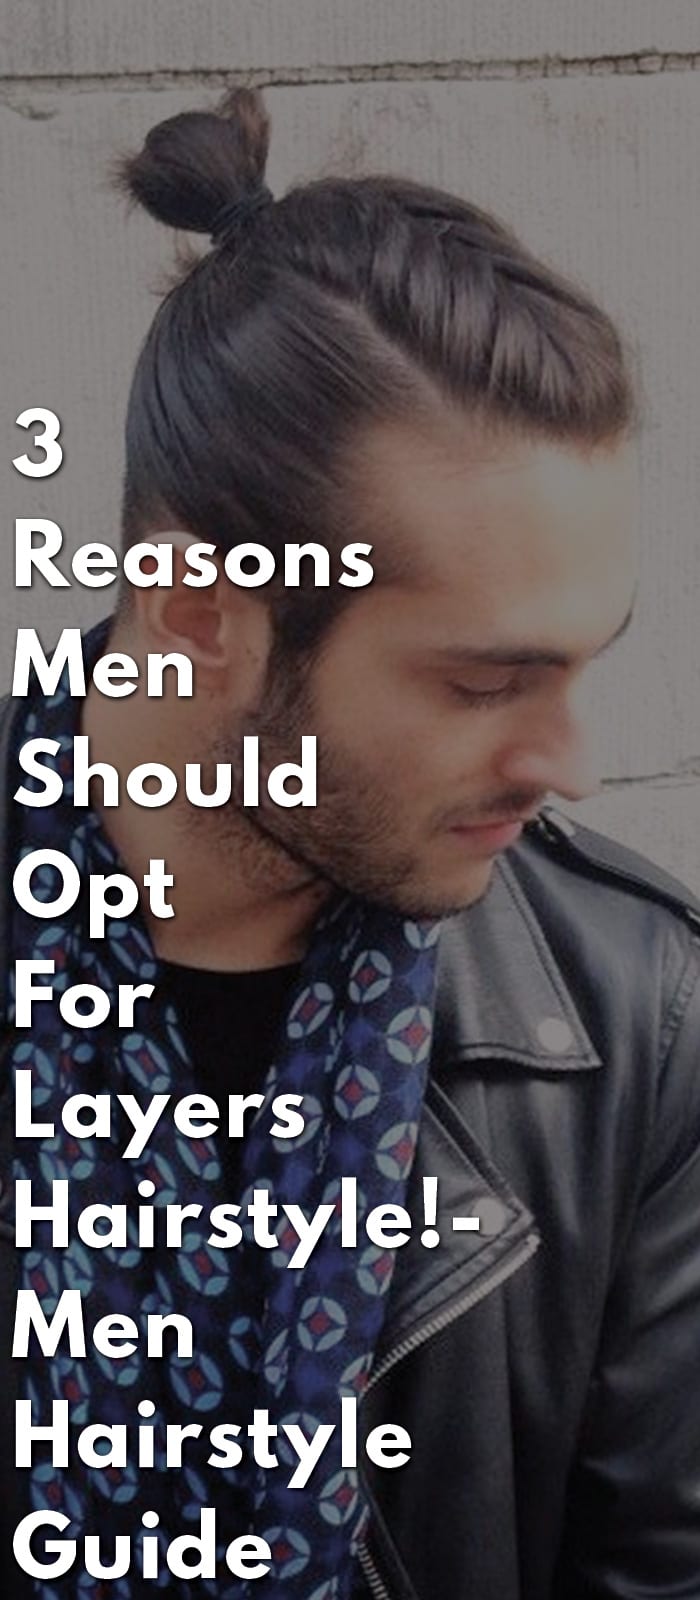 3-Reasons-Men-Should-Opt-For-Layers-Hairstyle!-Men-Hairstyle-Guide